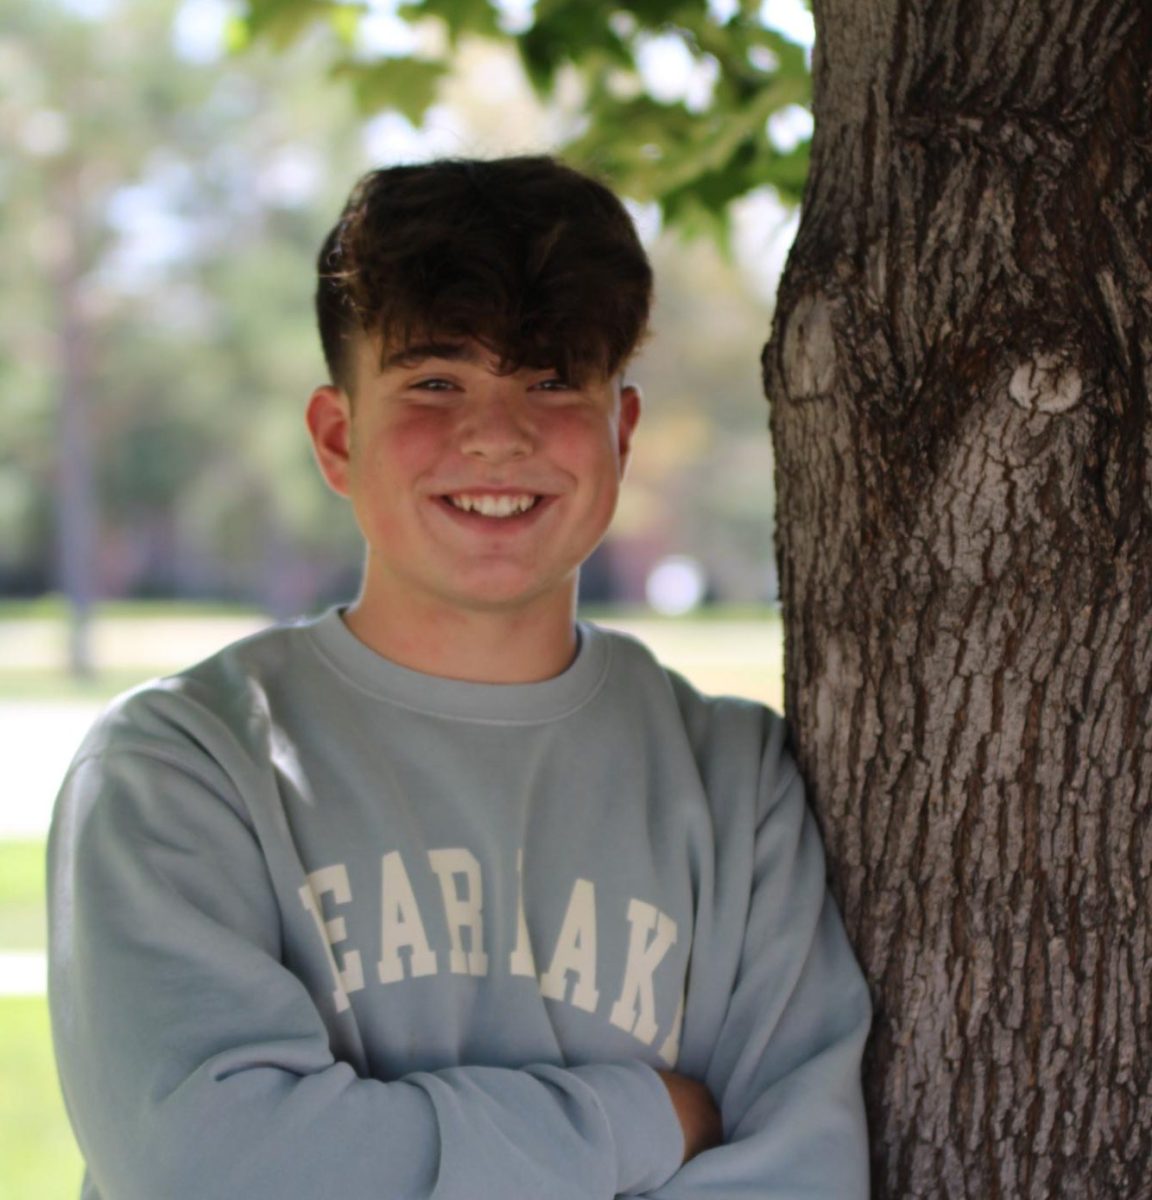 Image of Oliver Lodato (10) standing by a tree and smiling.